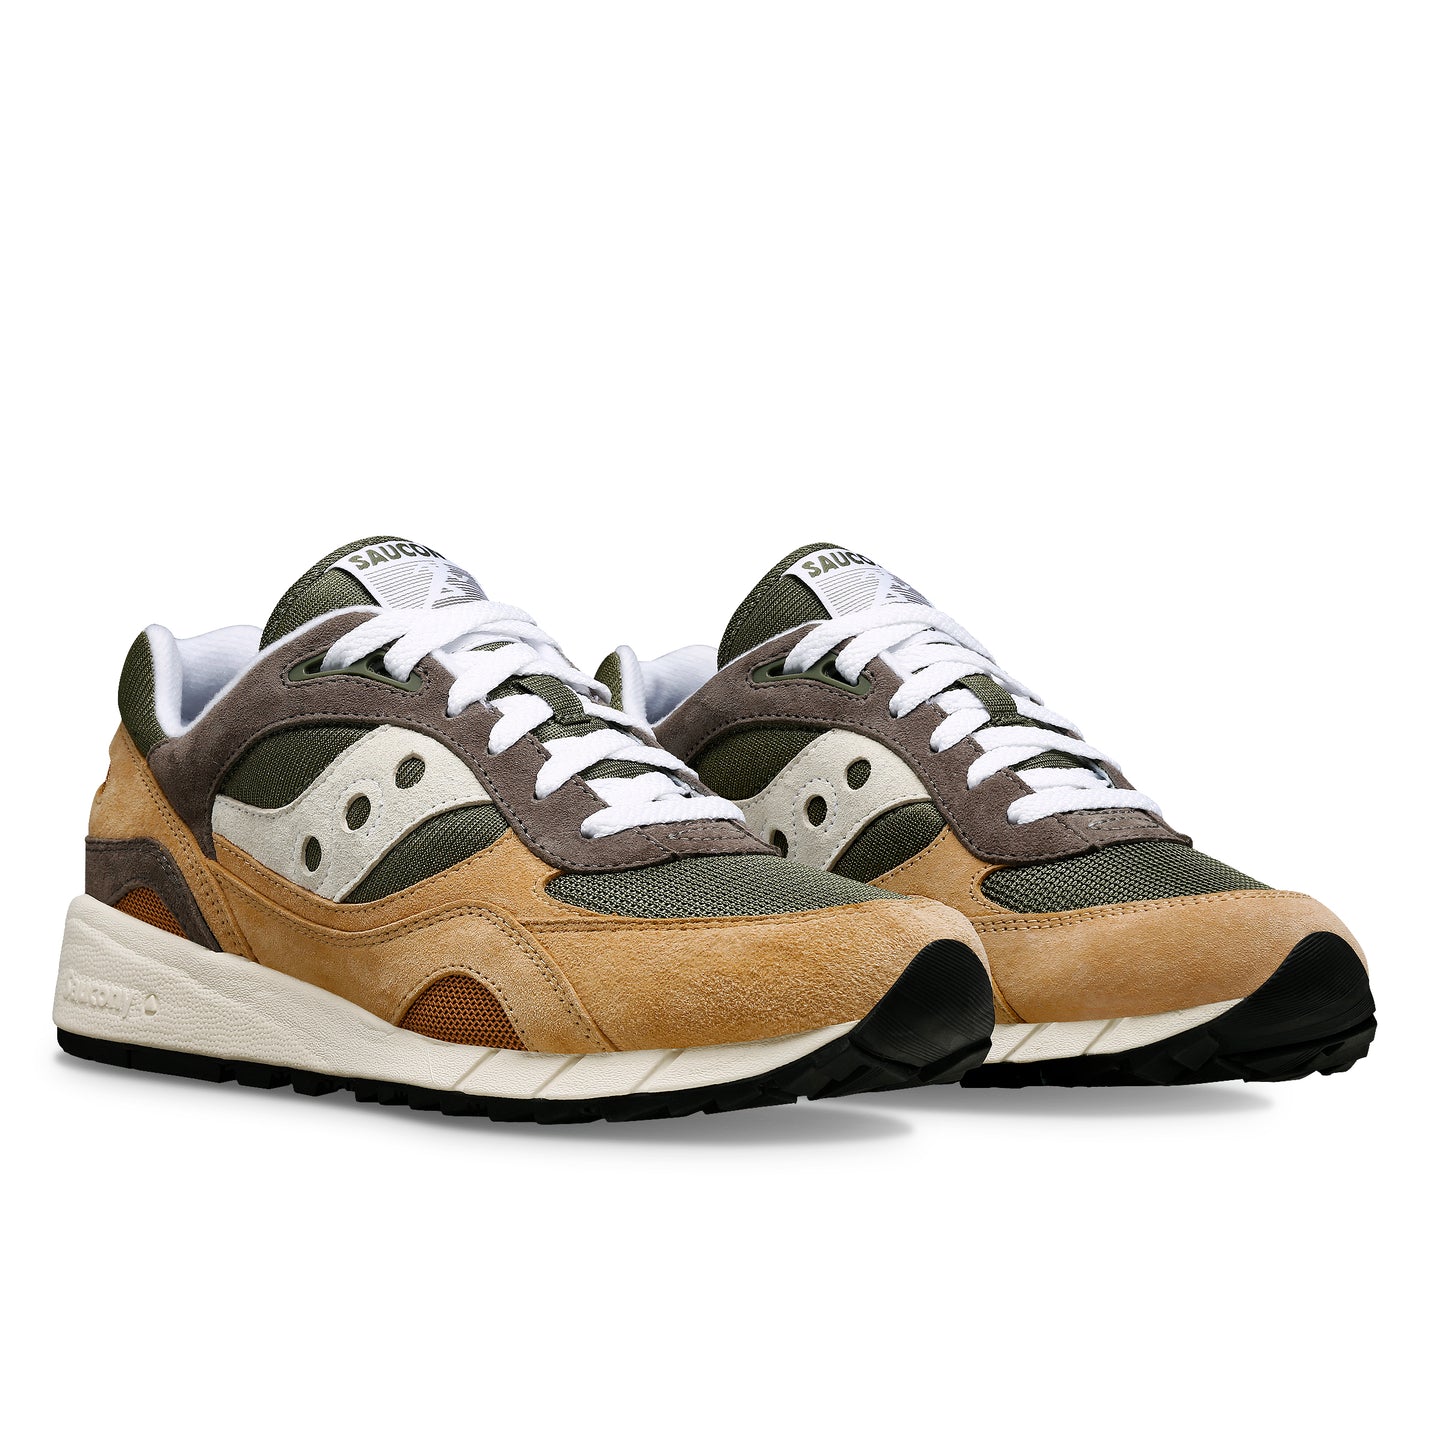 SAUCONY SHADOW 6000 - Green Brown